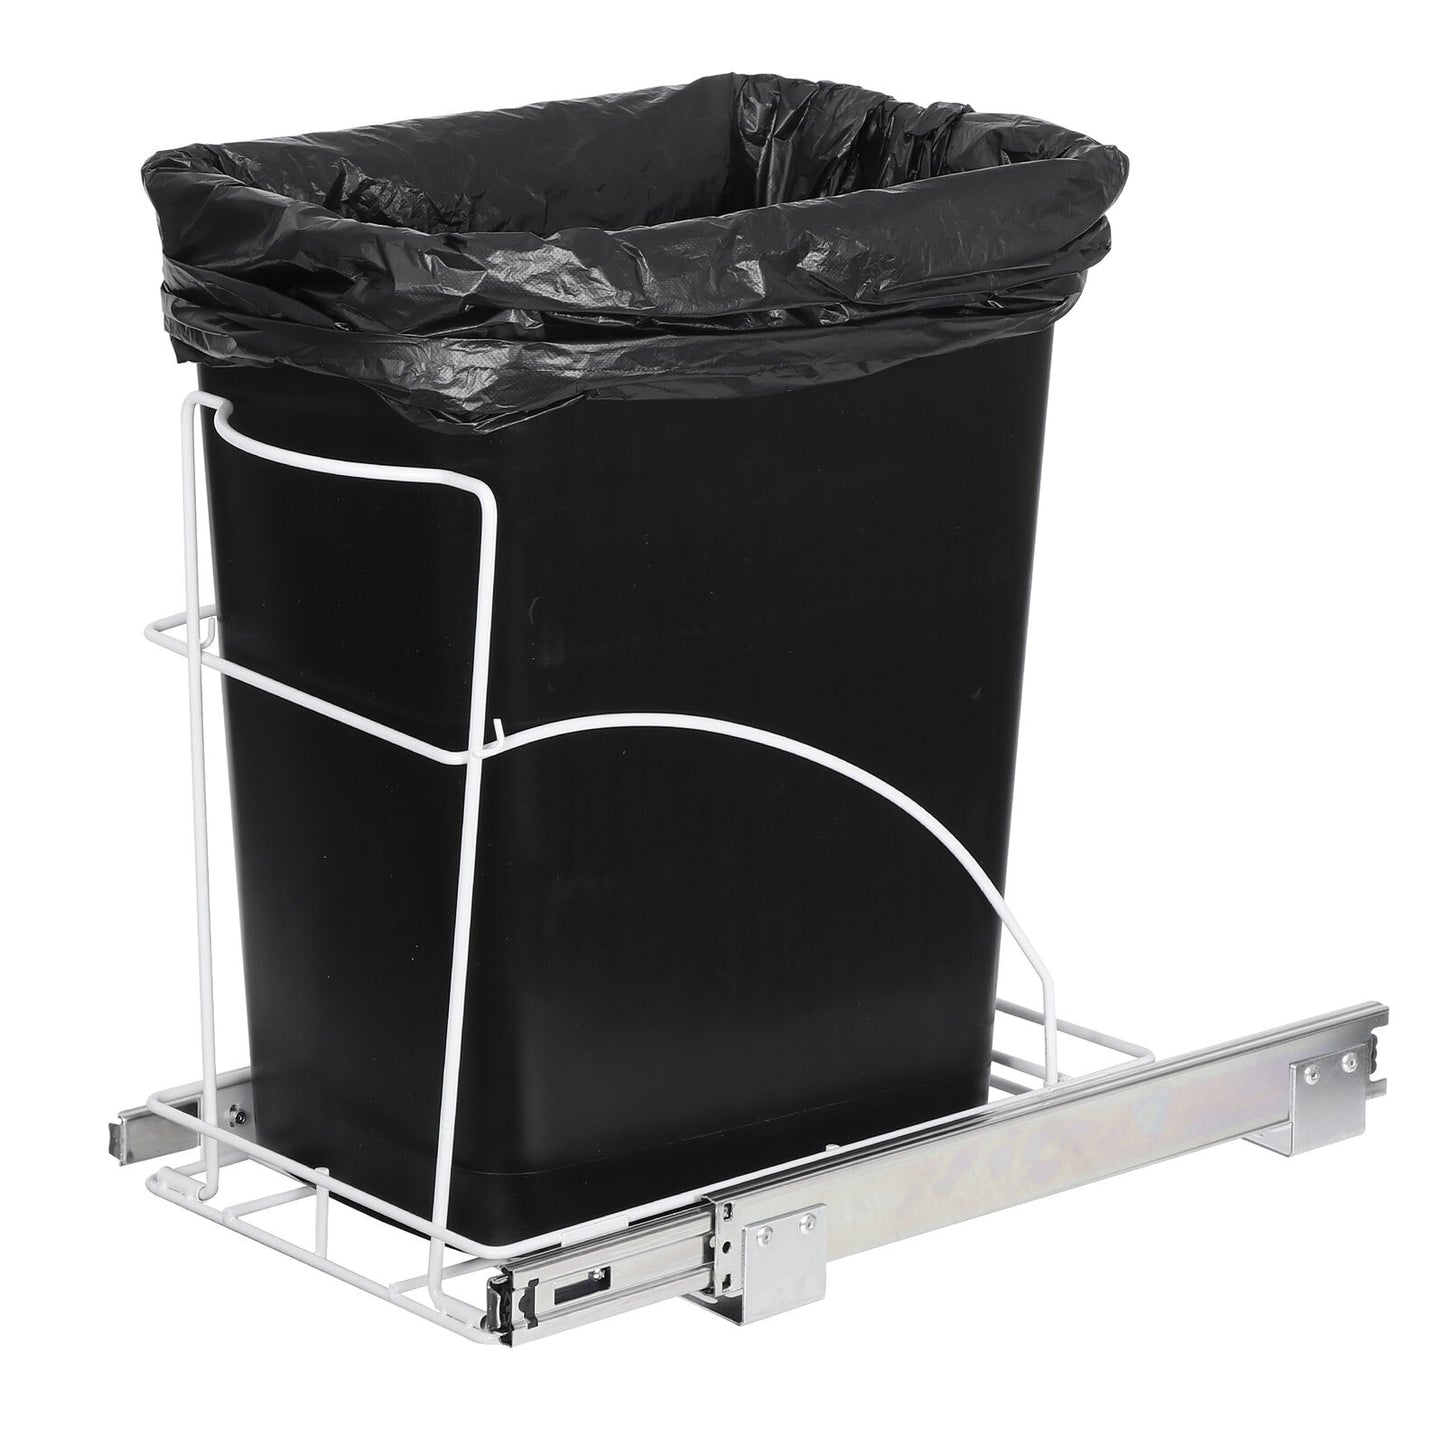 7.6 Gallon Pull Out Trash Can Under Cabinet Design 29 Liter Capacity Home Office